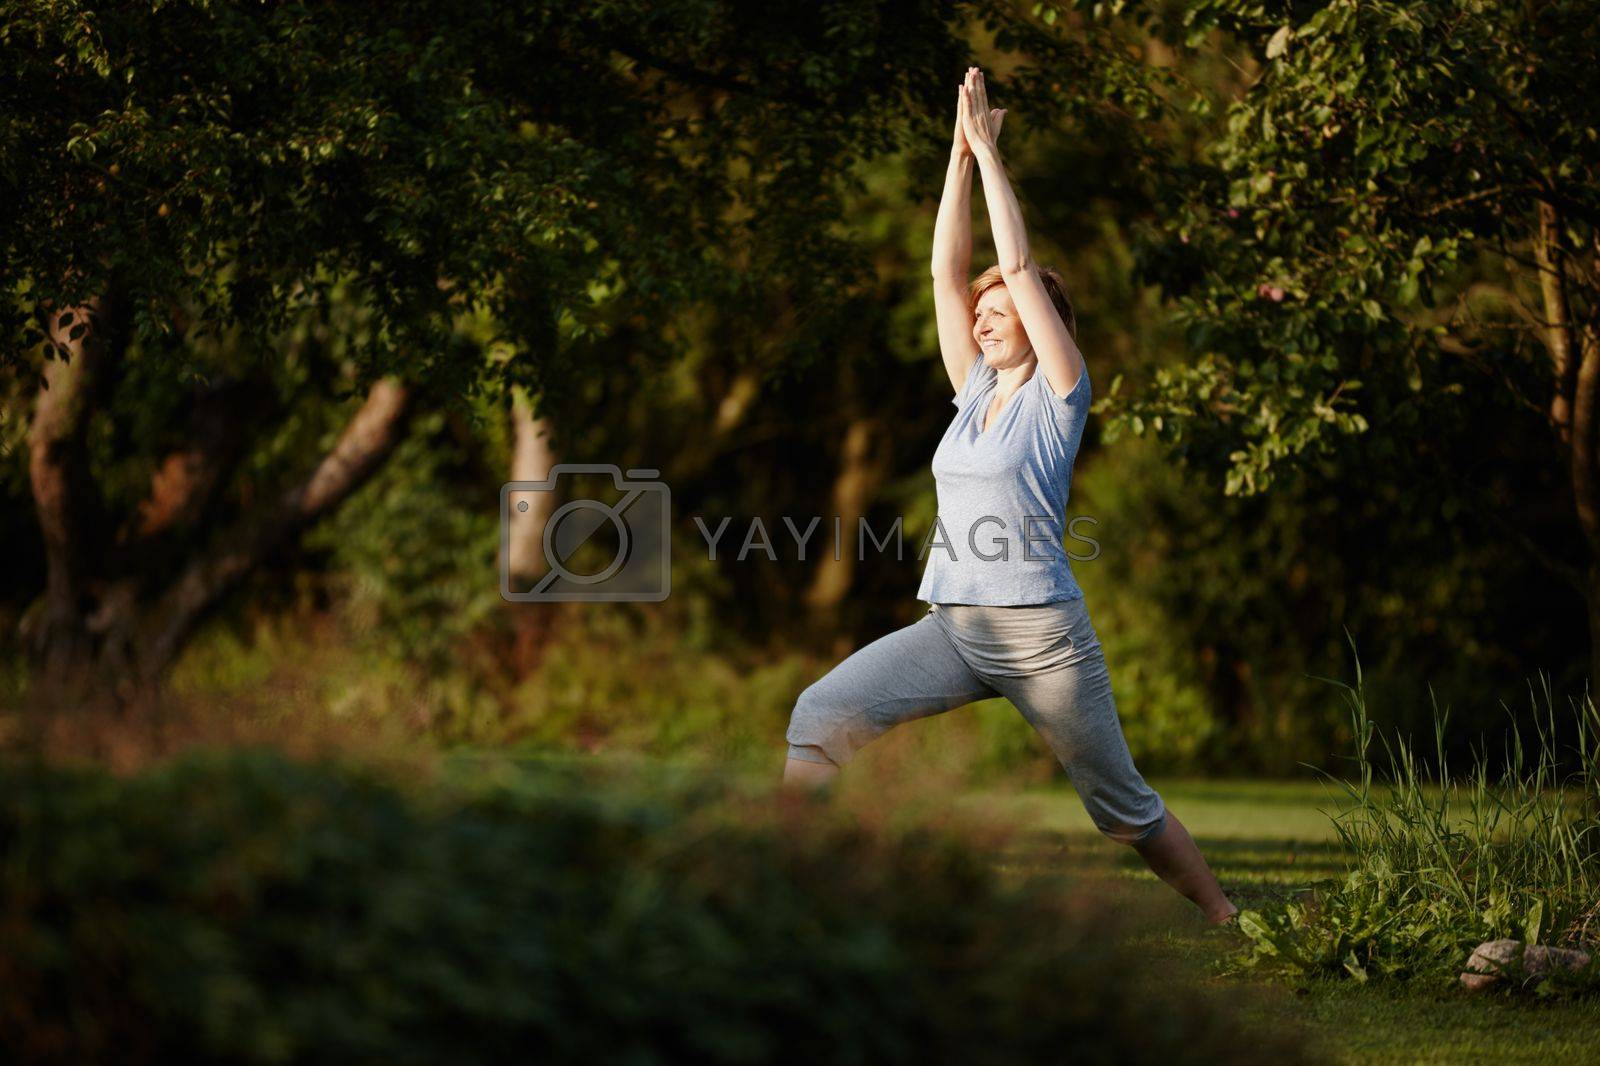 Royalty free image of Yoga keeps her glowing. an attractive woman doing yoga in the outdoors. by YuriArcurs